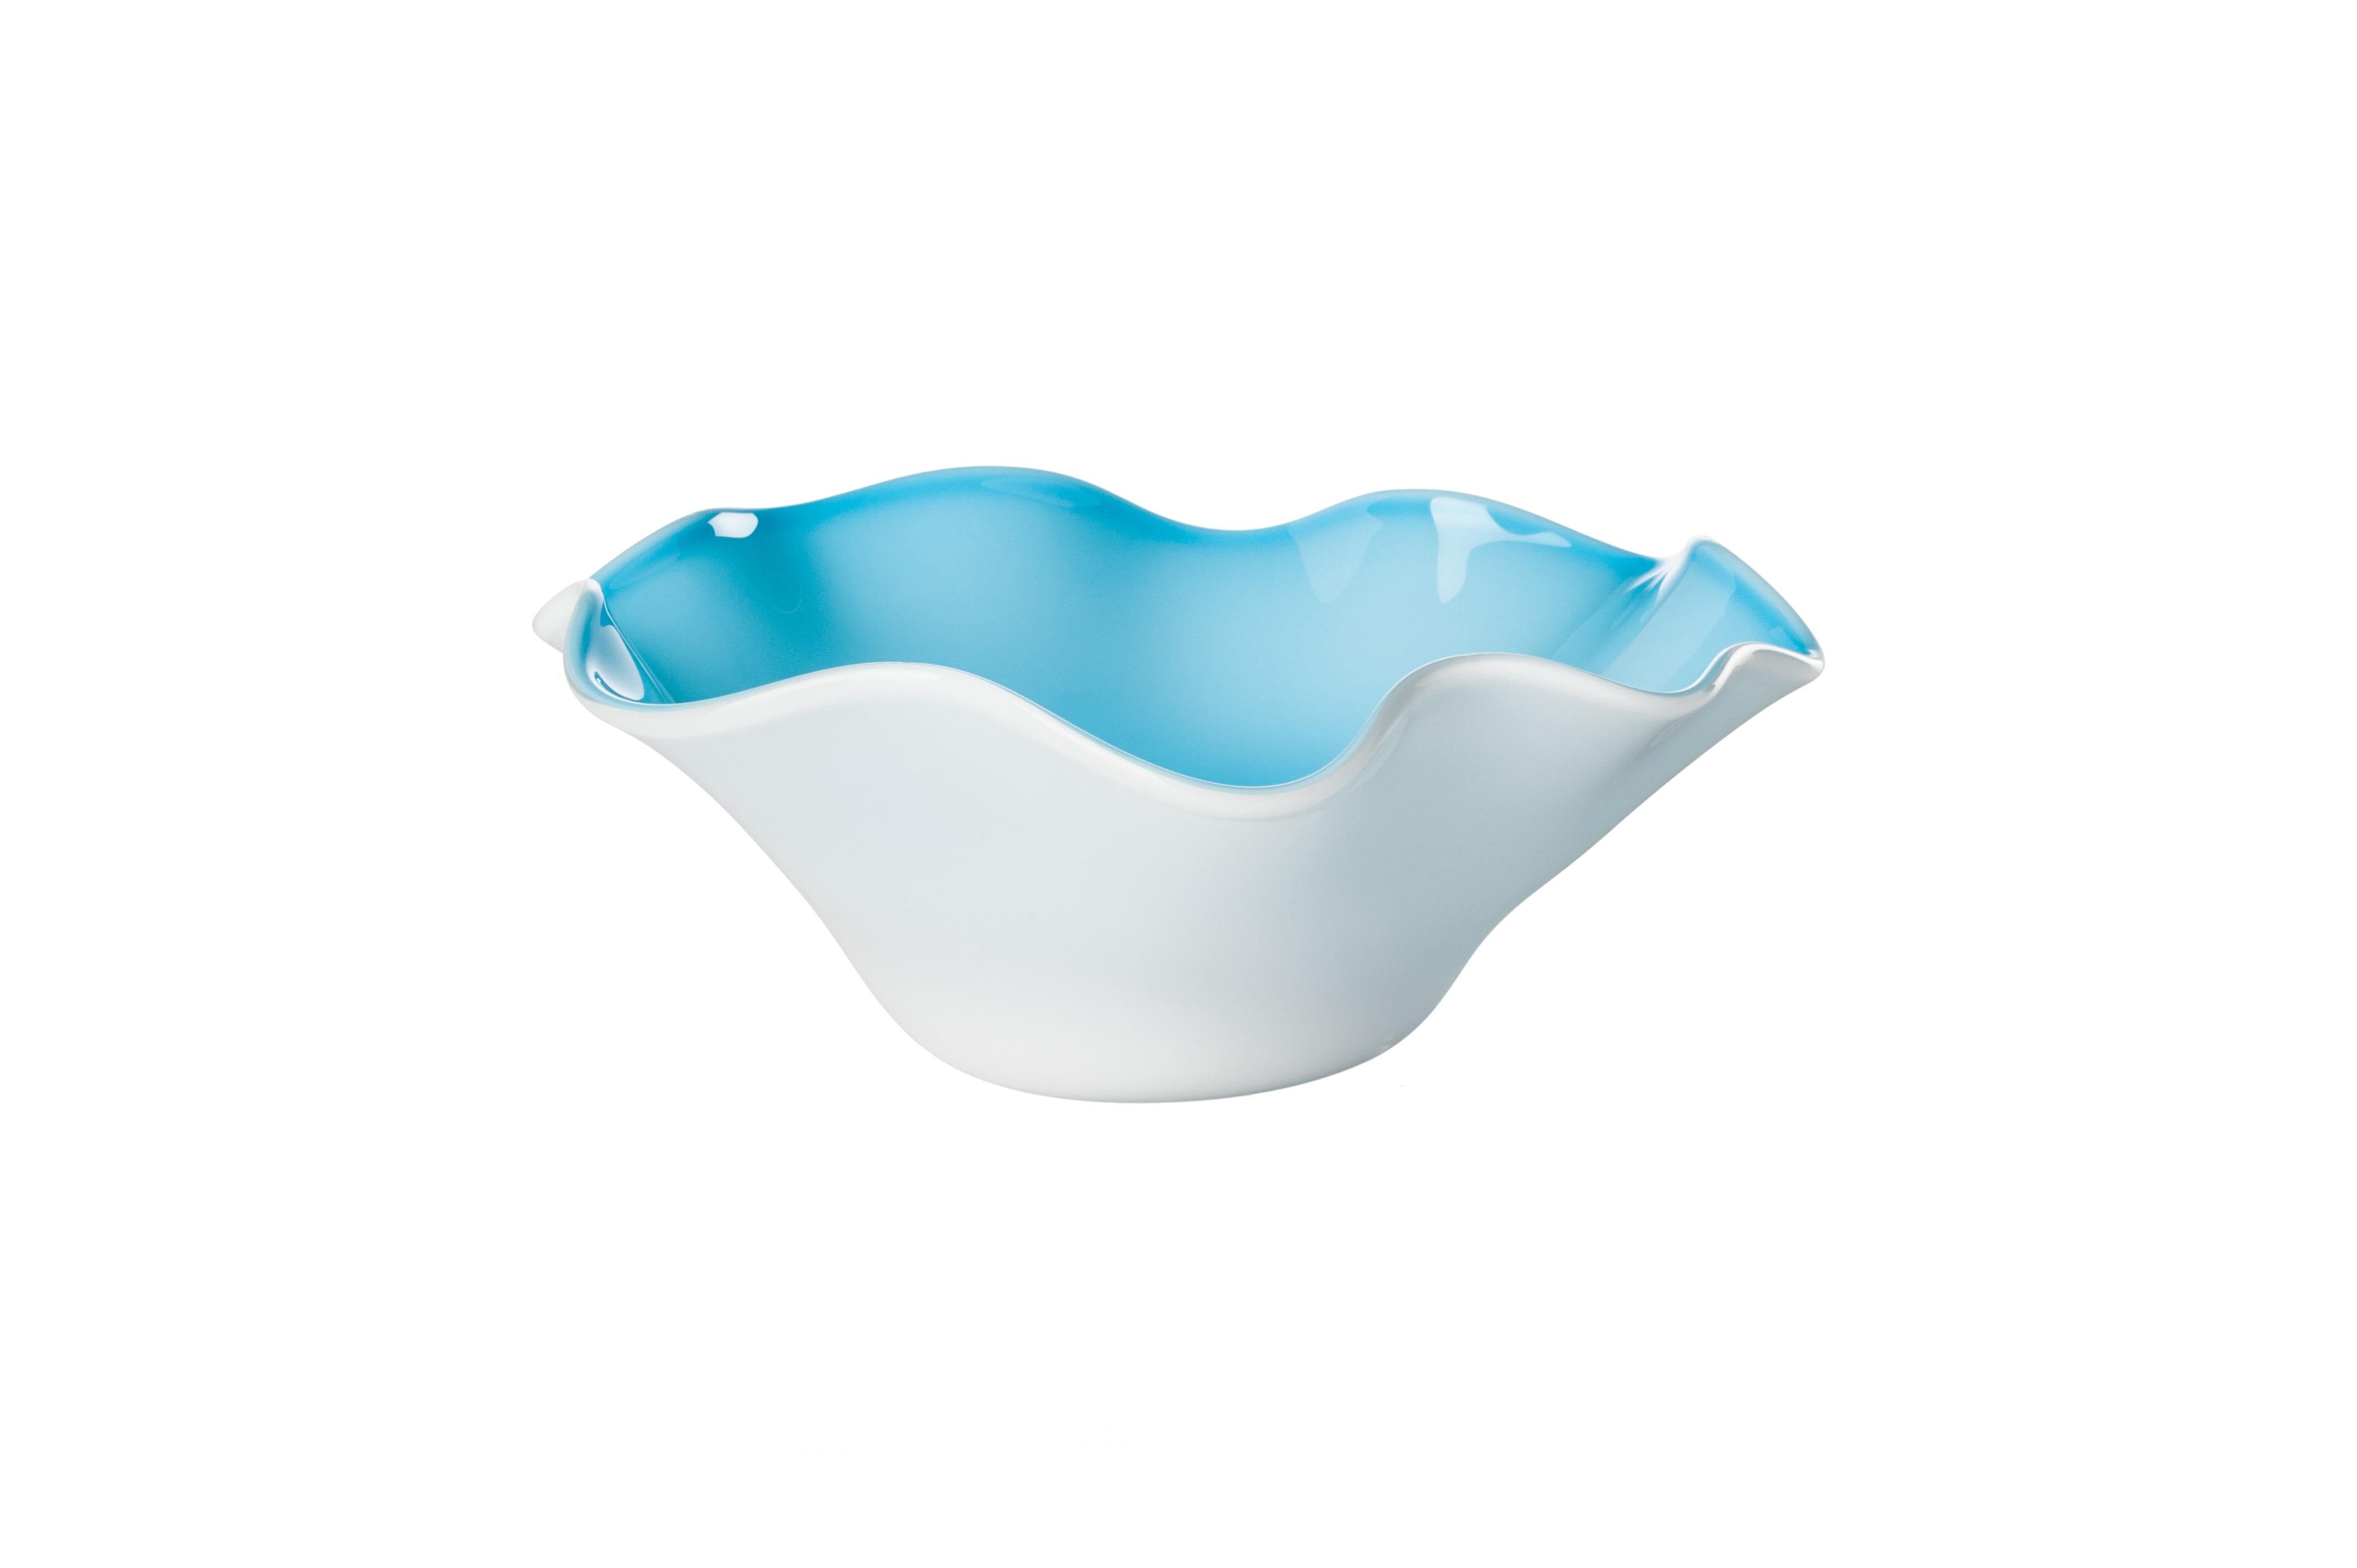 Venini glass bowl with pinched rim in milk-white and aquamarine. Perfect for indoor home decor as container, vide-poche or statement piece for any room. Also available in other colors on 1stdibs.

Dimensions: 18 cm diameter x 7.5 cm height.